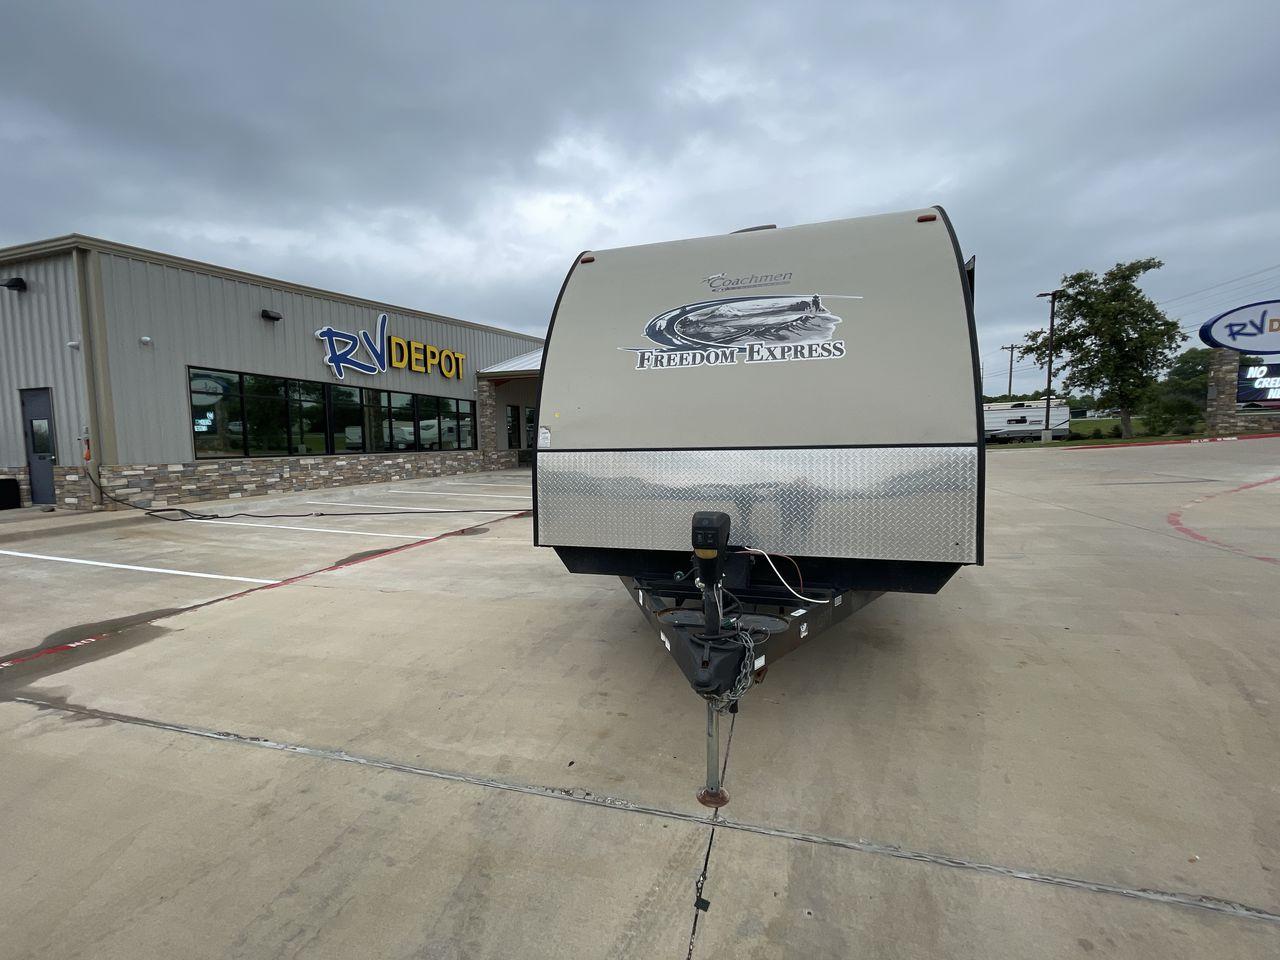 2015 TAN FREEDOM EXPRESS 305RKDS (5ZT2FEWB1FA) , Length: 34.5 ft. | Dry Weight: 6,199 lbs | Gross Weight: 9,500 lbs. | Slides: 2 transmission, located at 4319 N Main Street, Cleburne, TX, 76033, (817) 221-0660, 32.435829, -97.384178 - The 2015 Freedom Express 305RKDS is a travel trailer designed to deliver an exceptional camping experience, combining freedom and comfort in every detail. It boasts a rear kitchen layout, providing a unique and functional living space. The rear kitchen is equipped with high-end appliances, ample cou - Photo #0